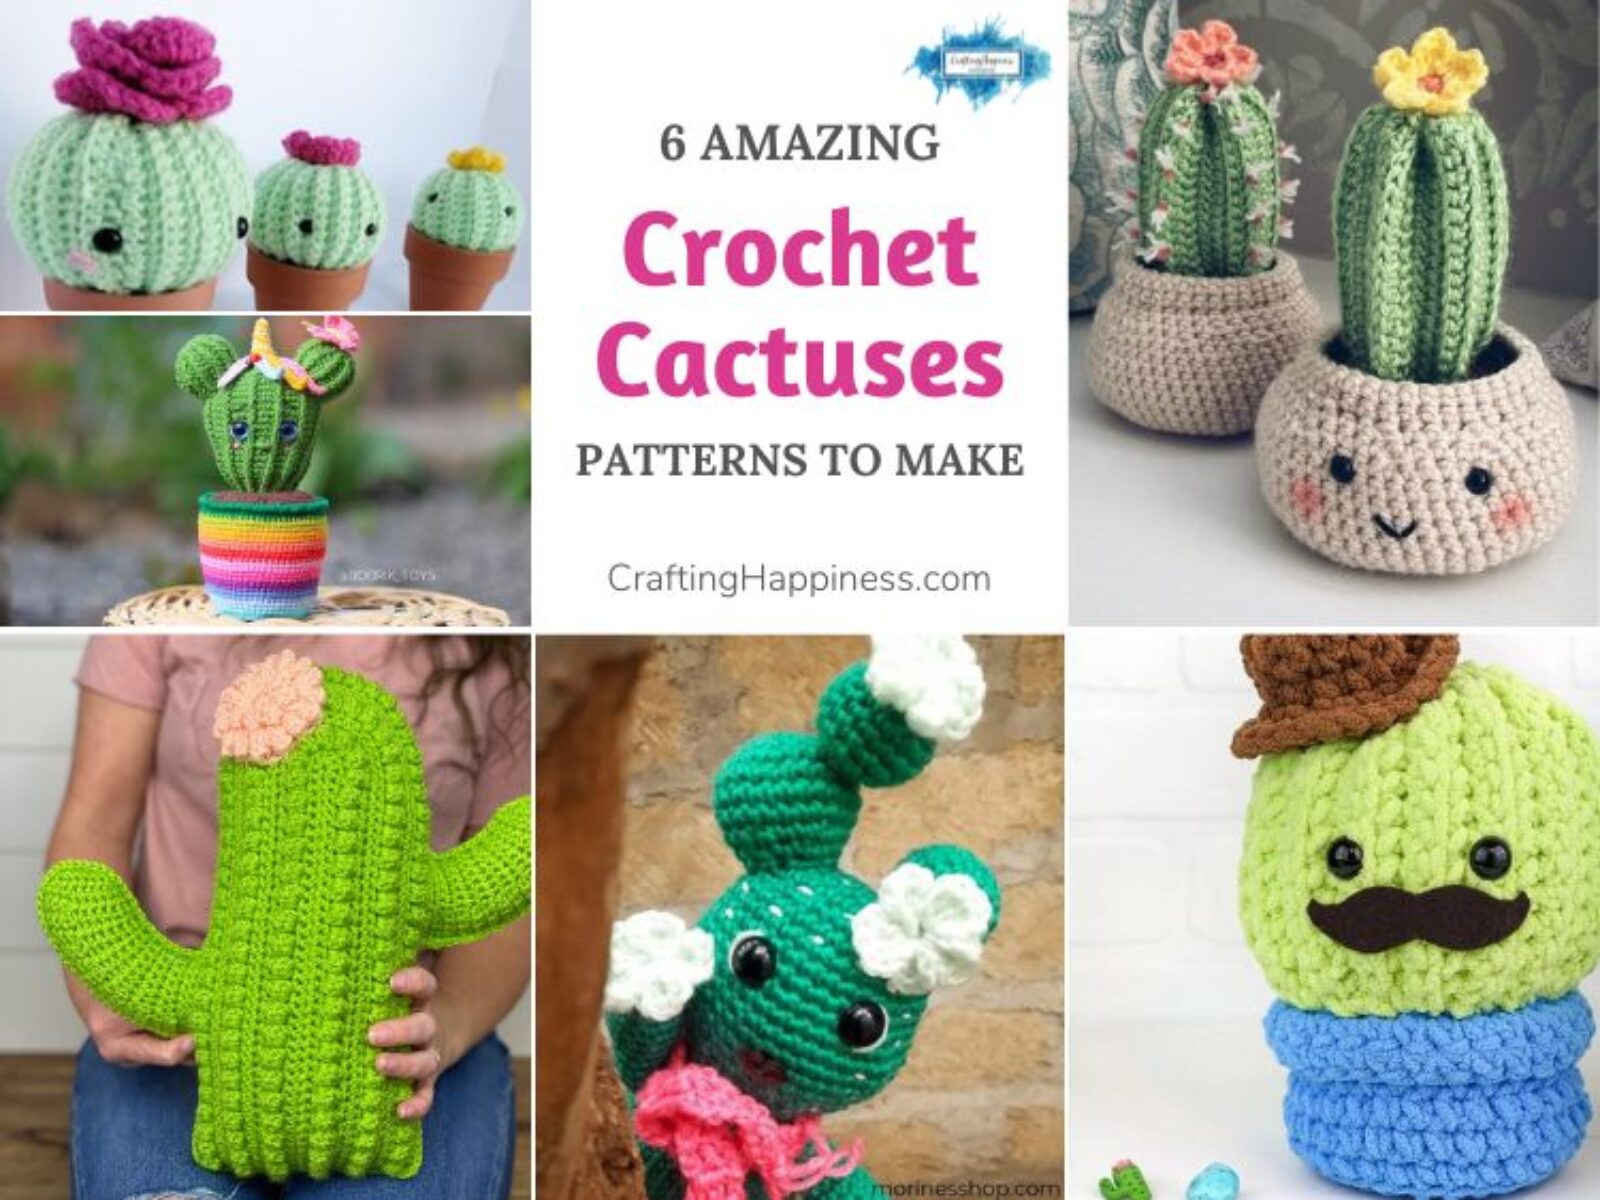 6 Amazing Crochet Cactus Patterns To Make FB POSTER